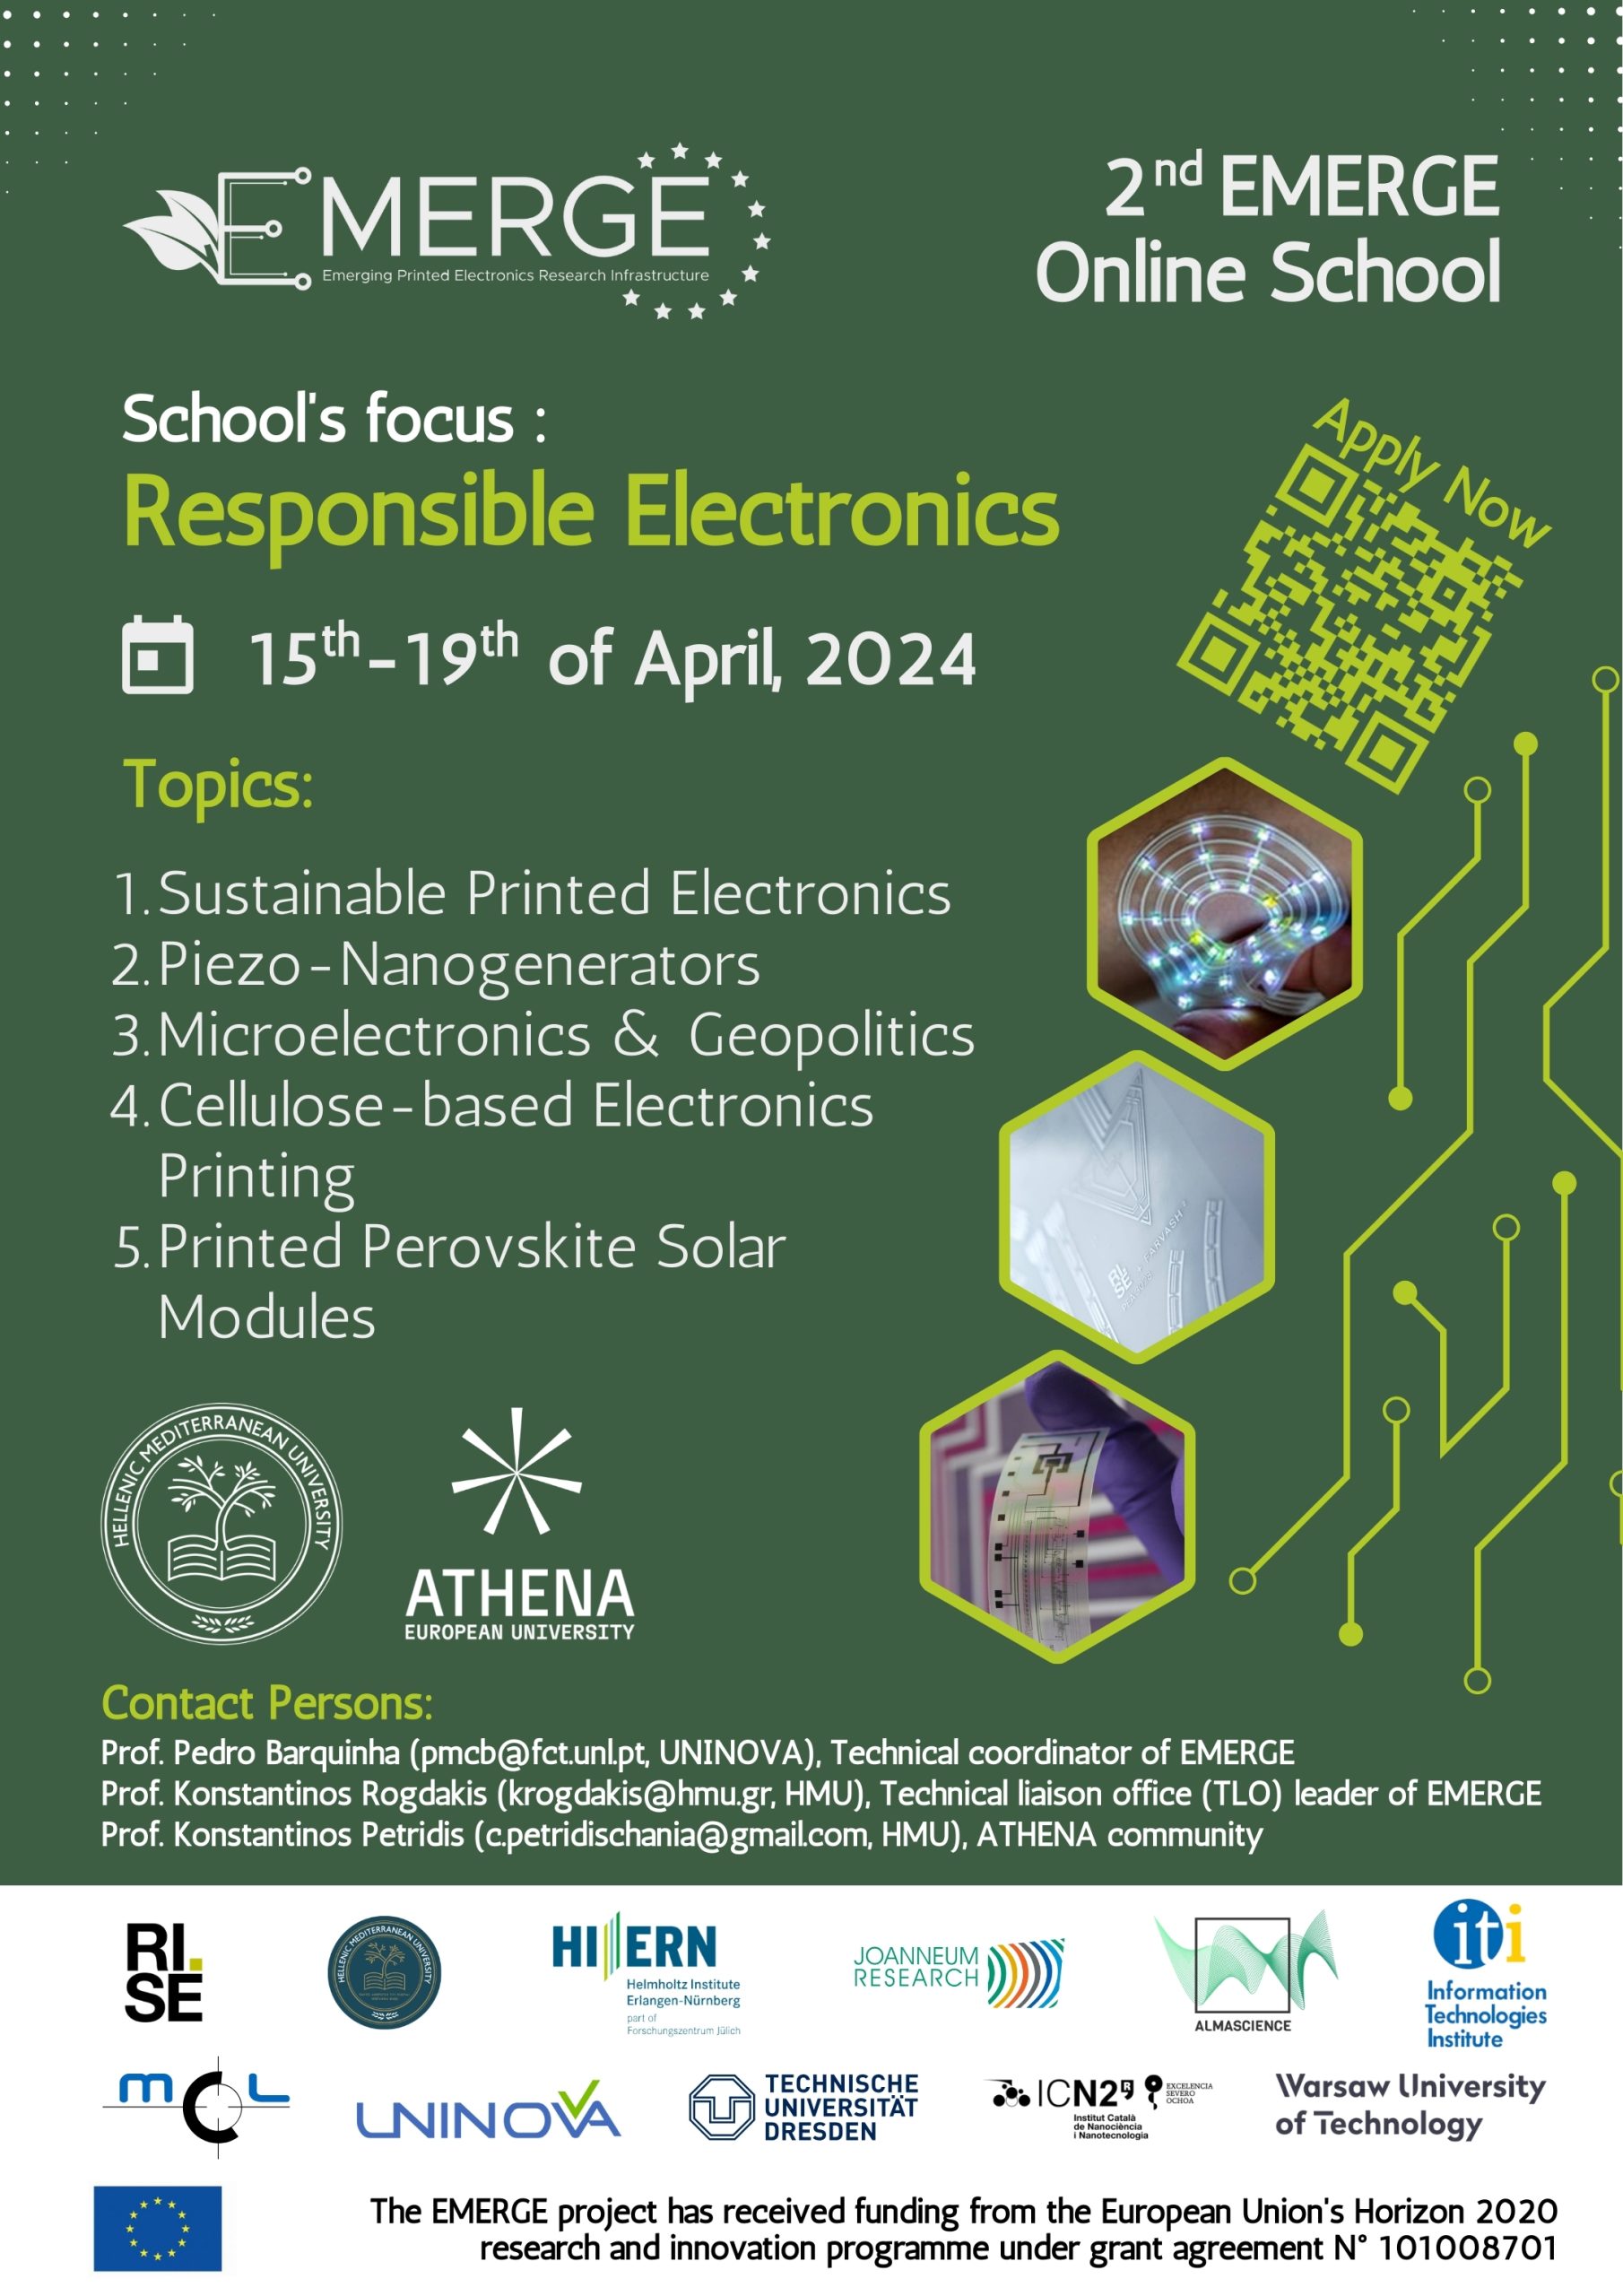 Second EMERGE project online school on responsible electronics